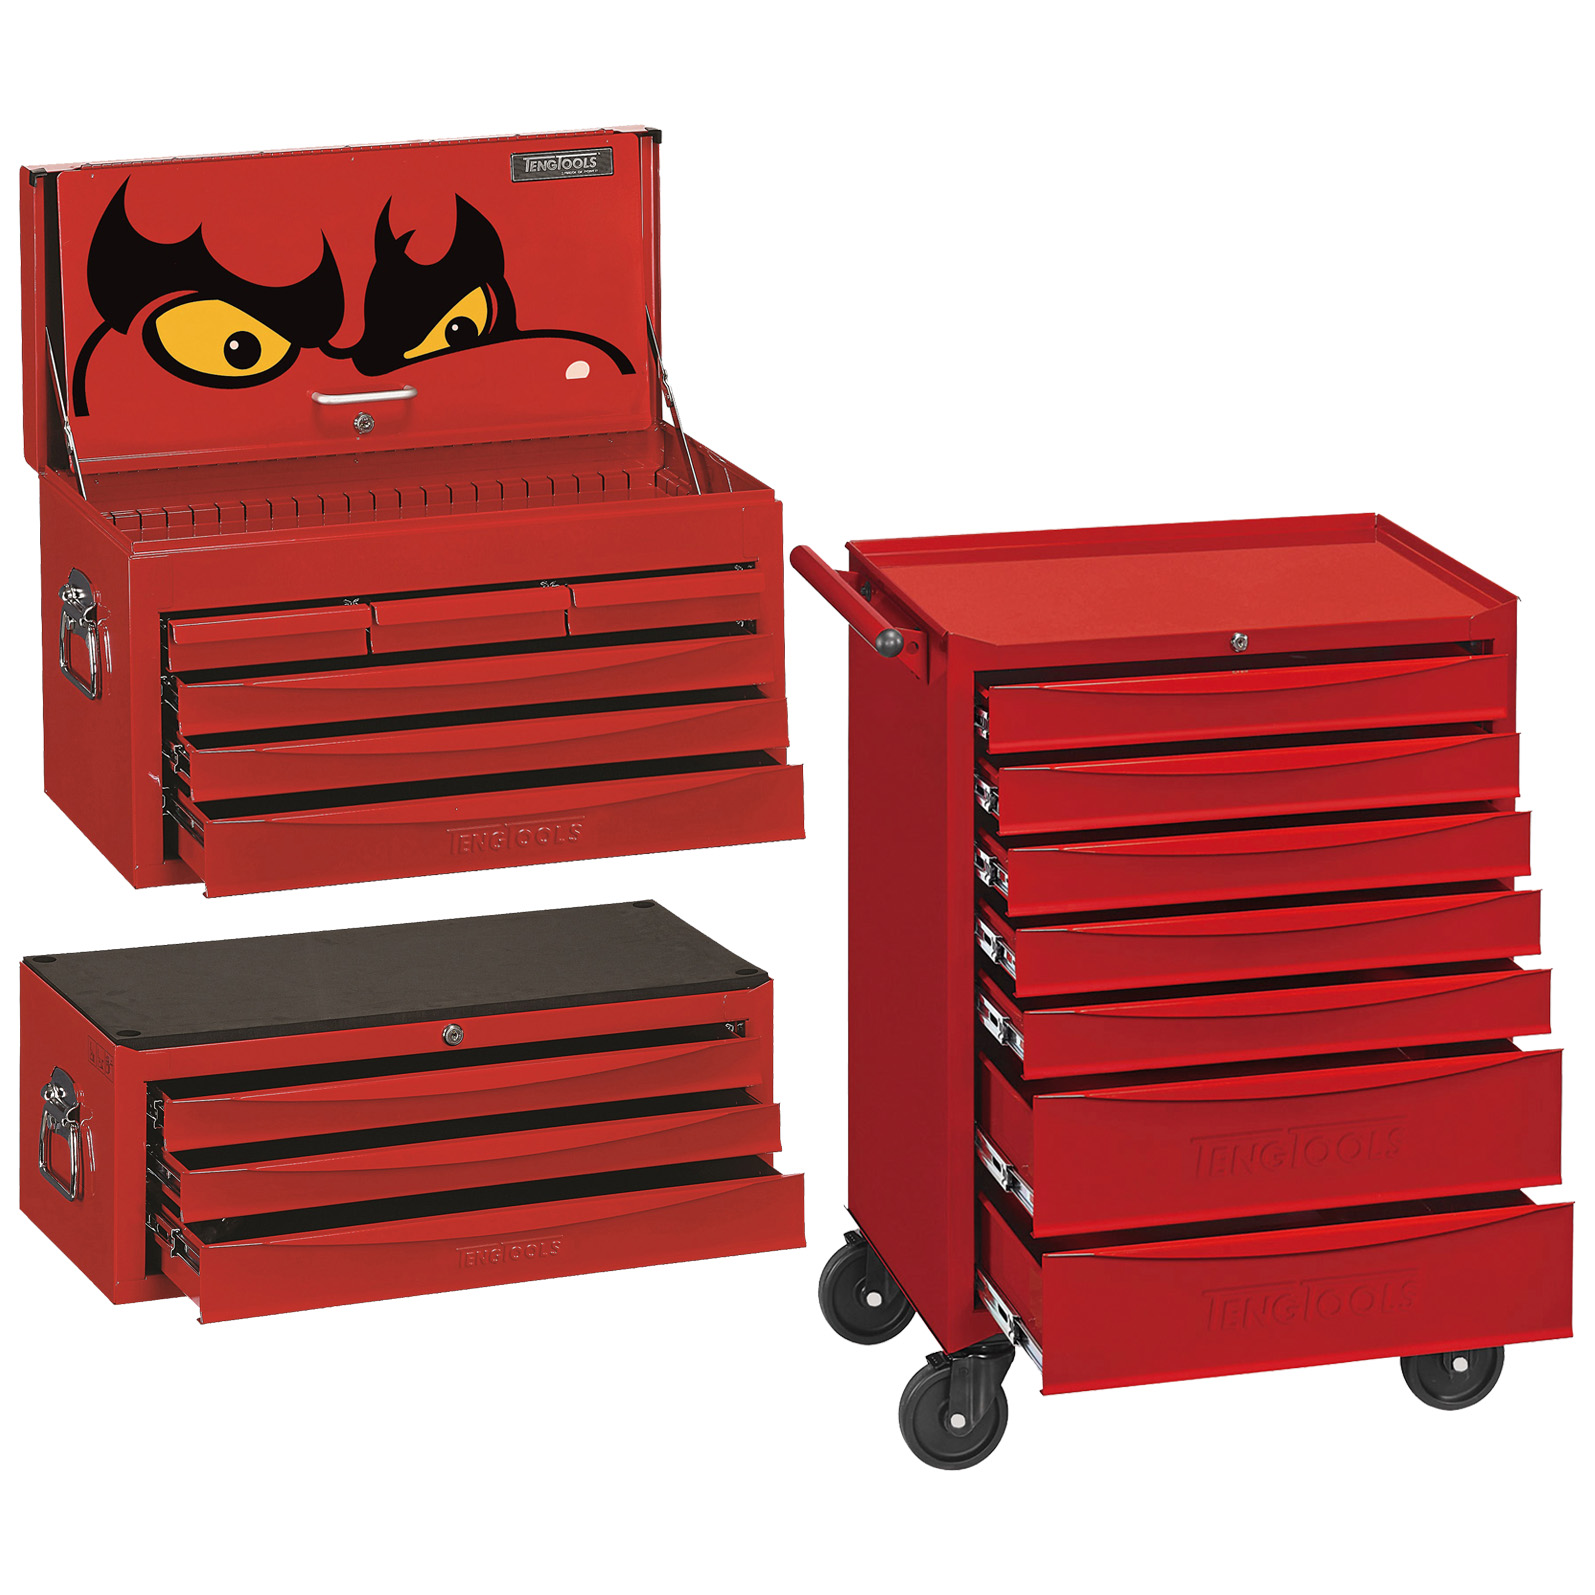 Teng Tools 7 Series 7 Drawer Roller Cabinet w/ 8 Series SV Middle and Top Boxes